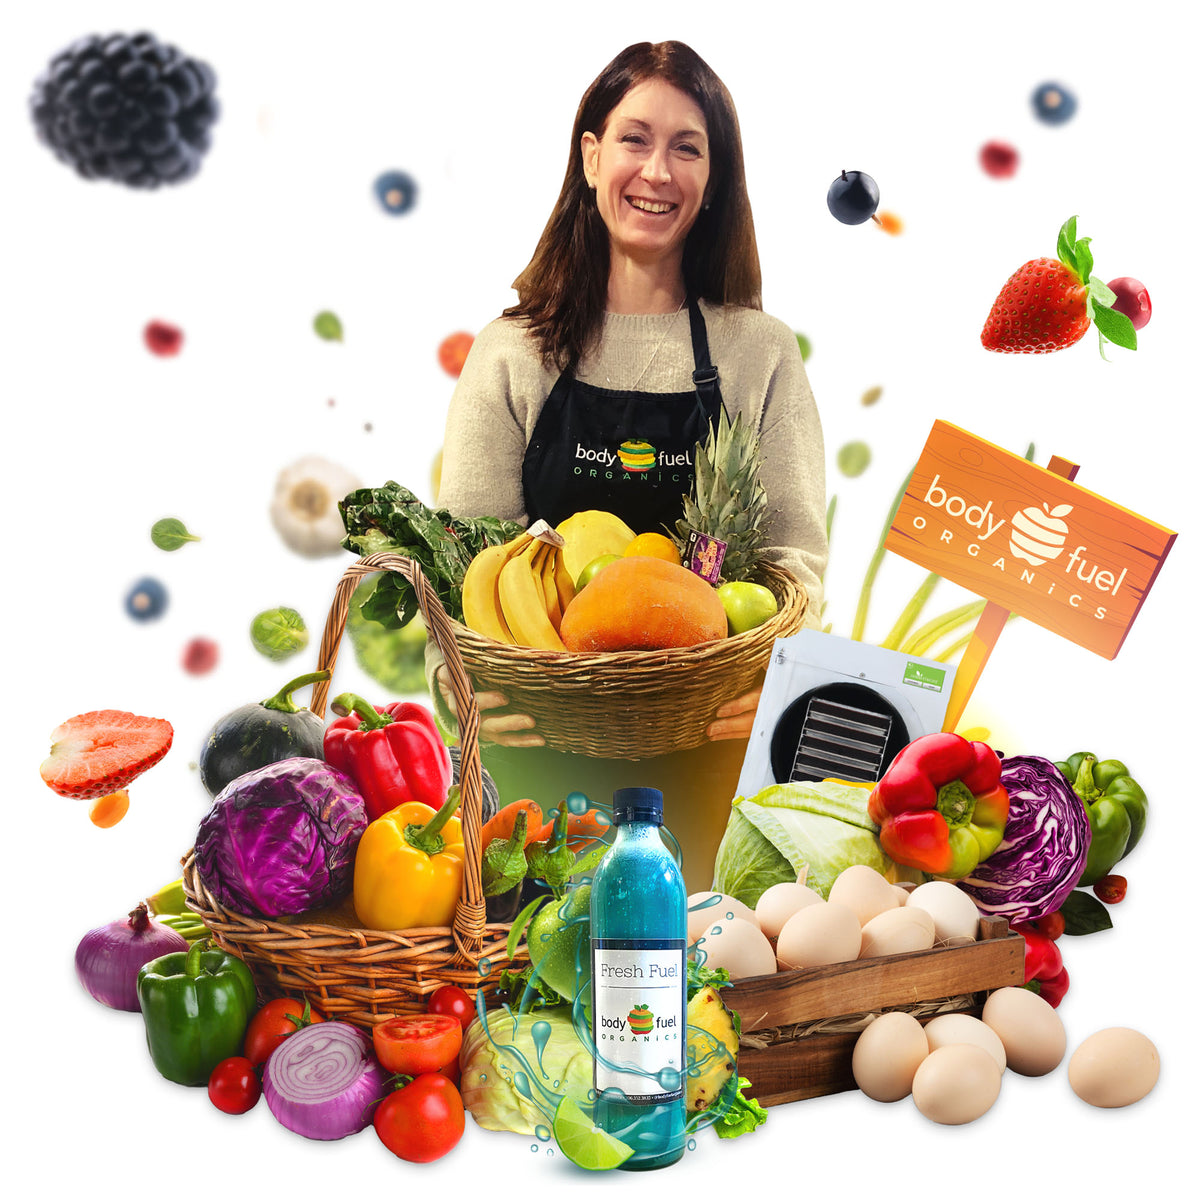 Lana the manager with organic, local and fresh fruits and vegetables and farm eggs. Shop our store now!